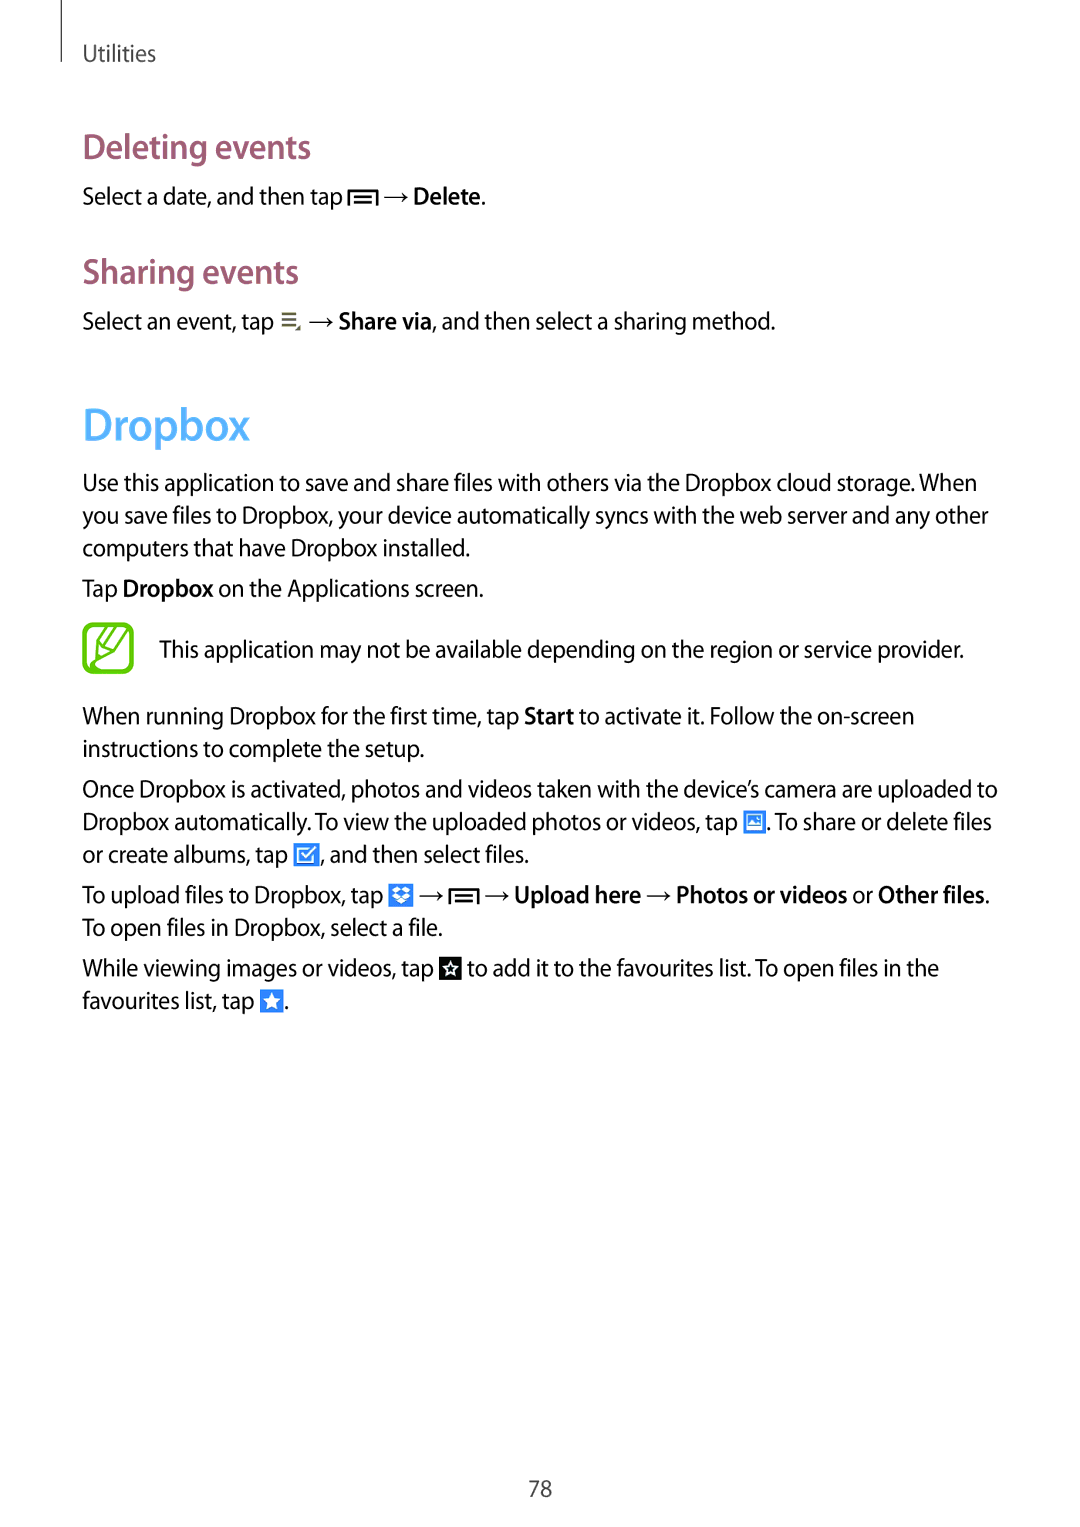 Samsung SM-T310 user manual Dropbox, Deleting events, Sharing events 